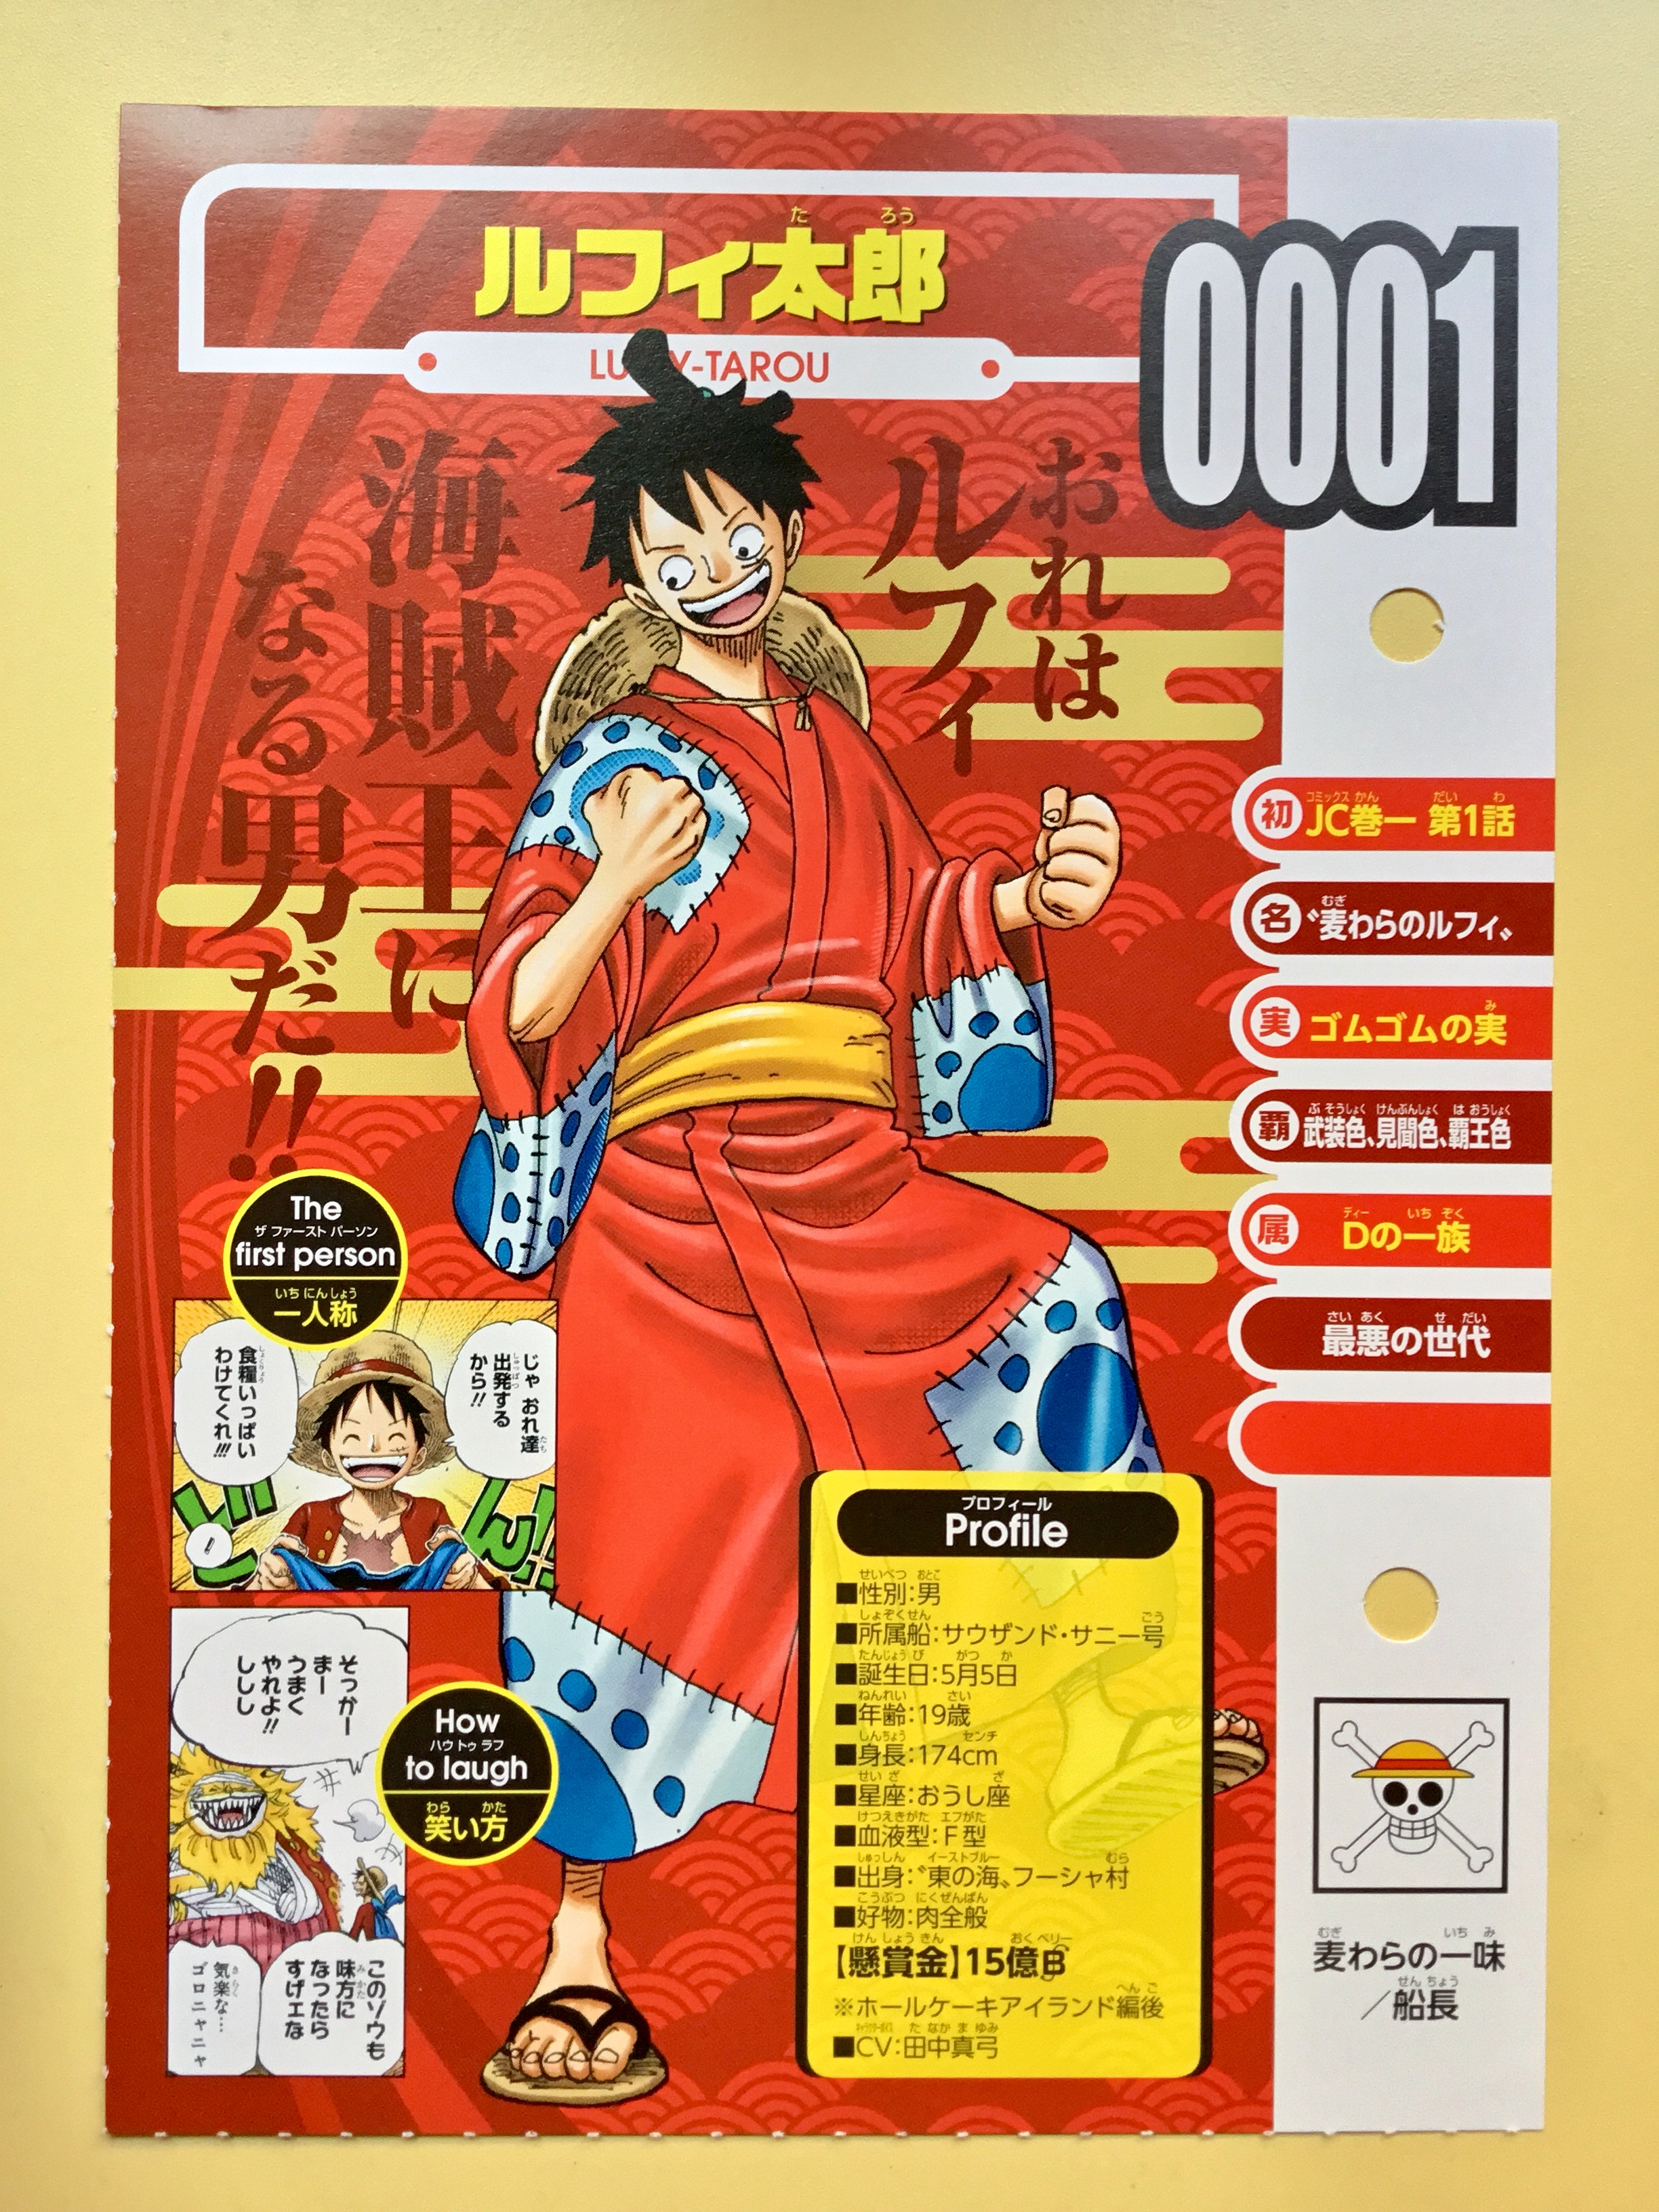 Vivre Card One Piece Visual Dictionary New One Piece Databook On Sale 4th September Page 106